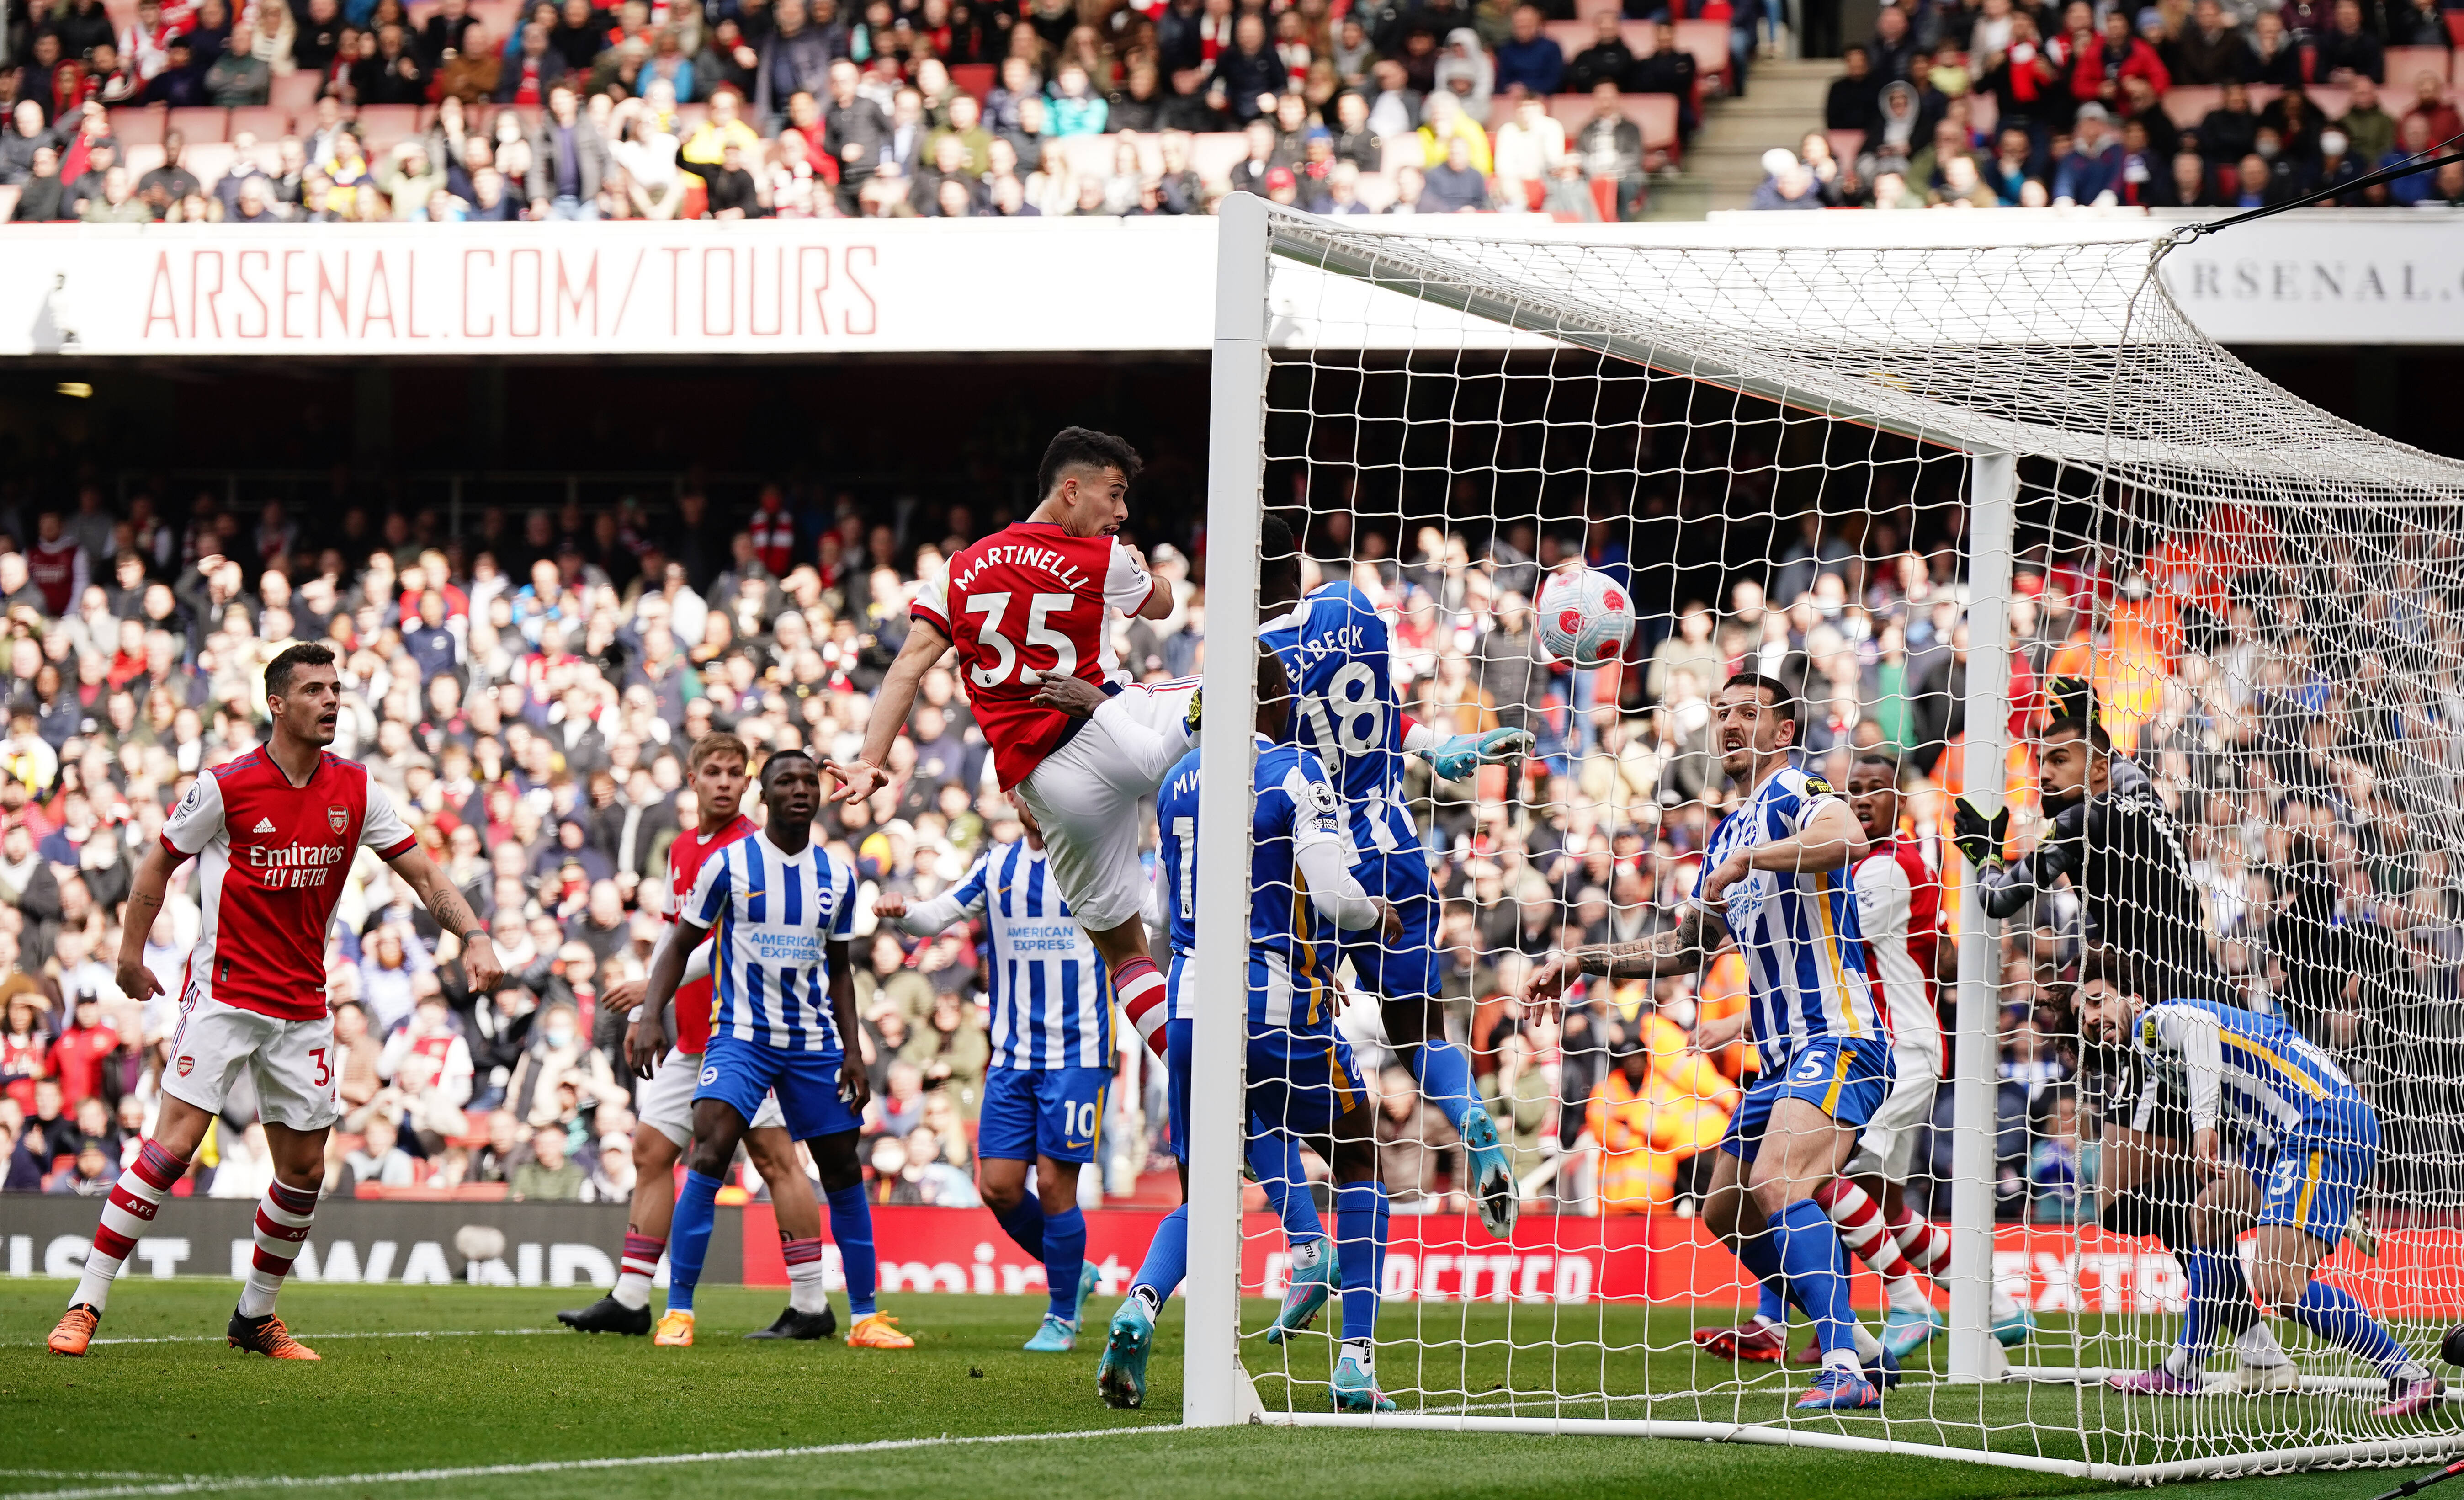 Gabriel Martinelli (35) pictured scoring for Arsenal against Brighton but his goal was later disallowed after a VAR review